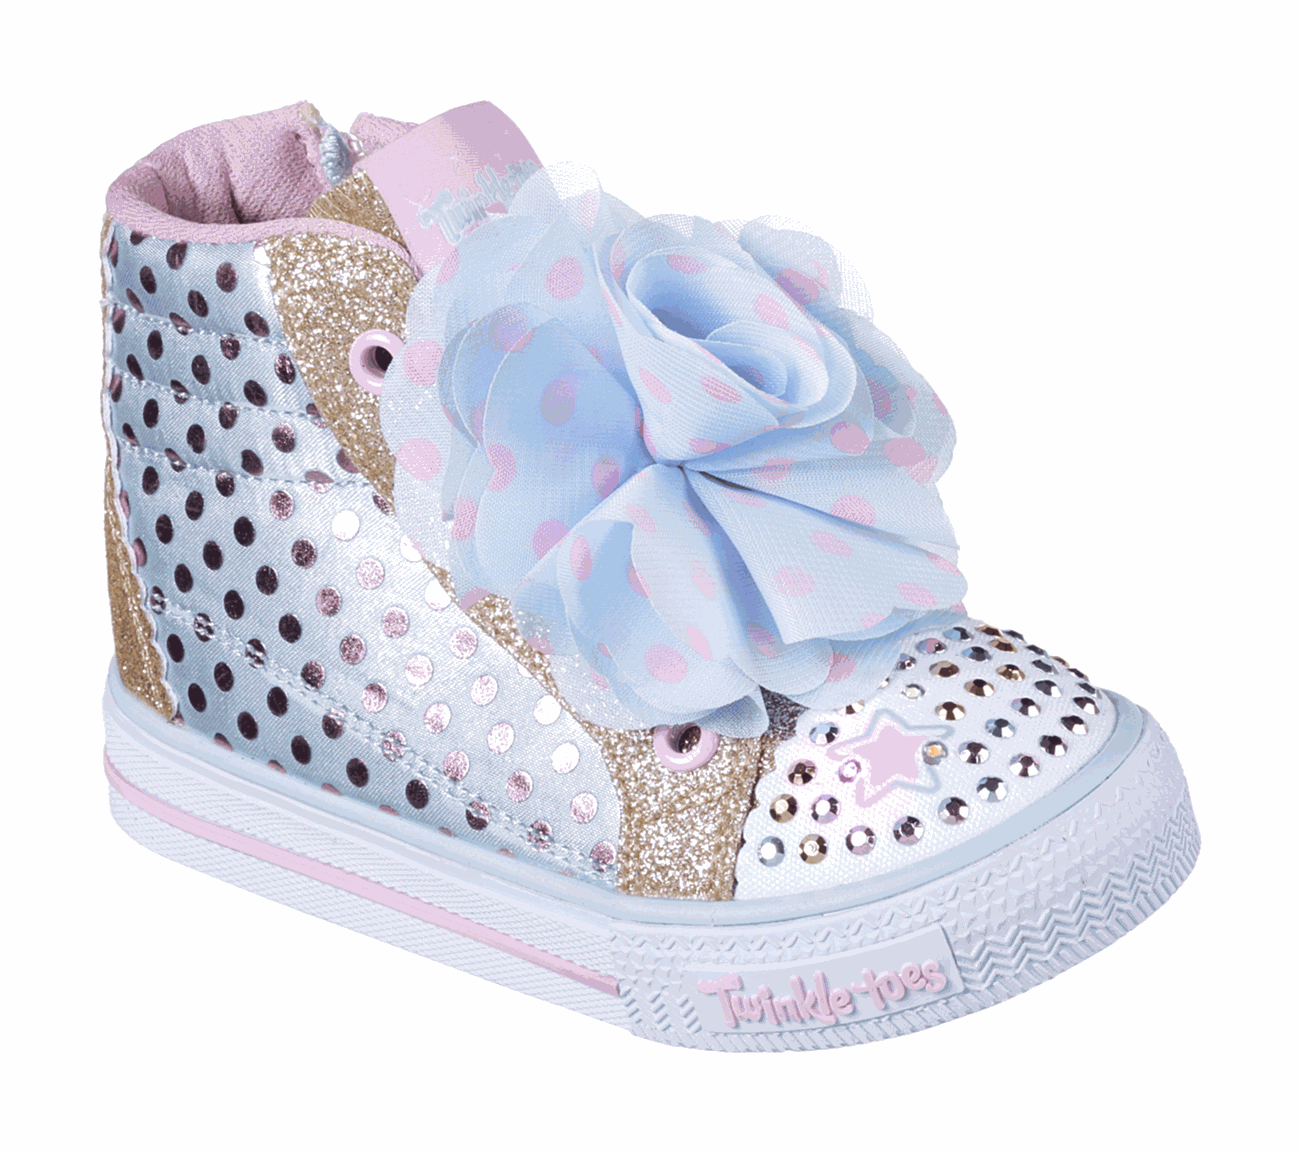 twinkle toes from skechers